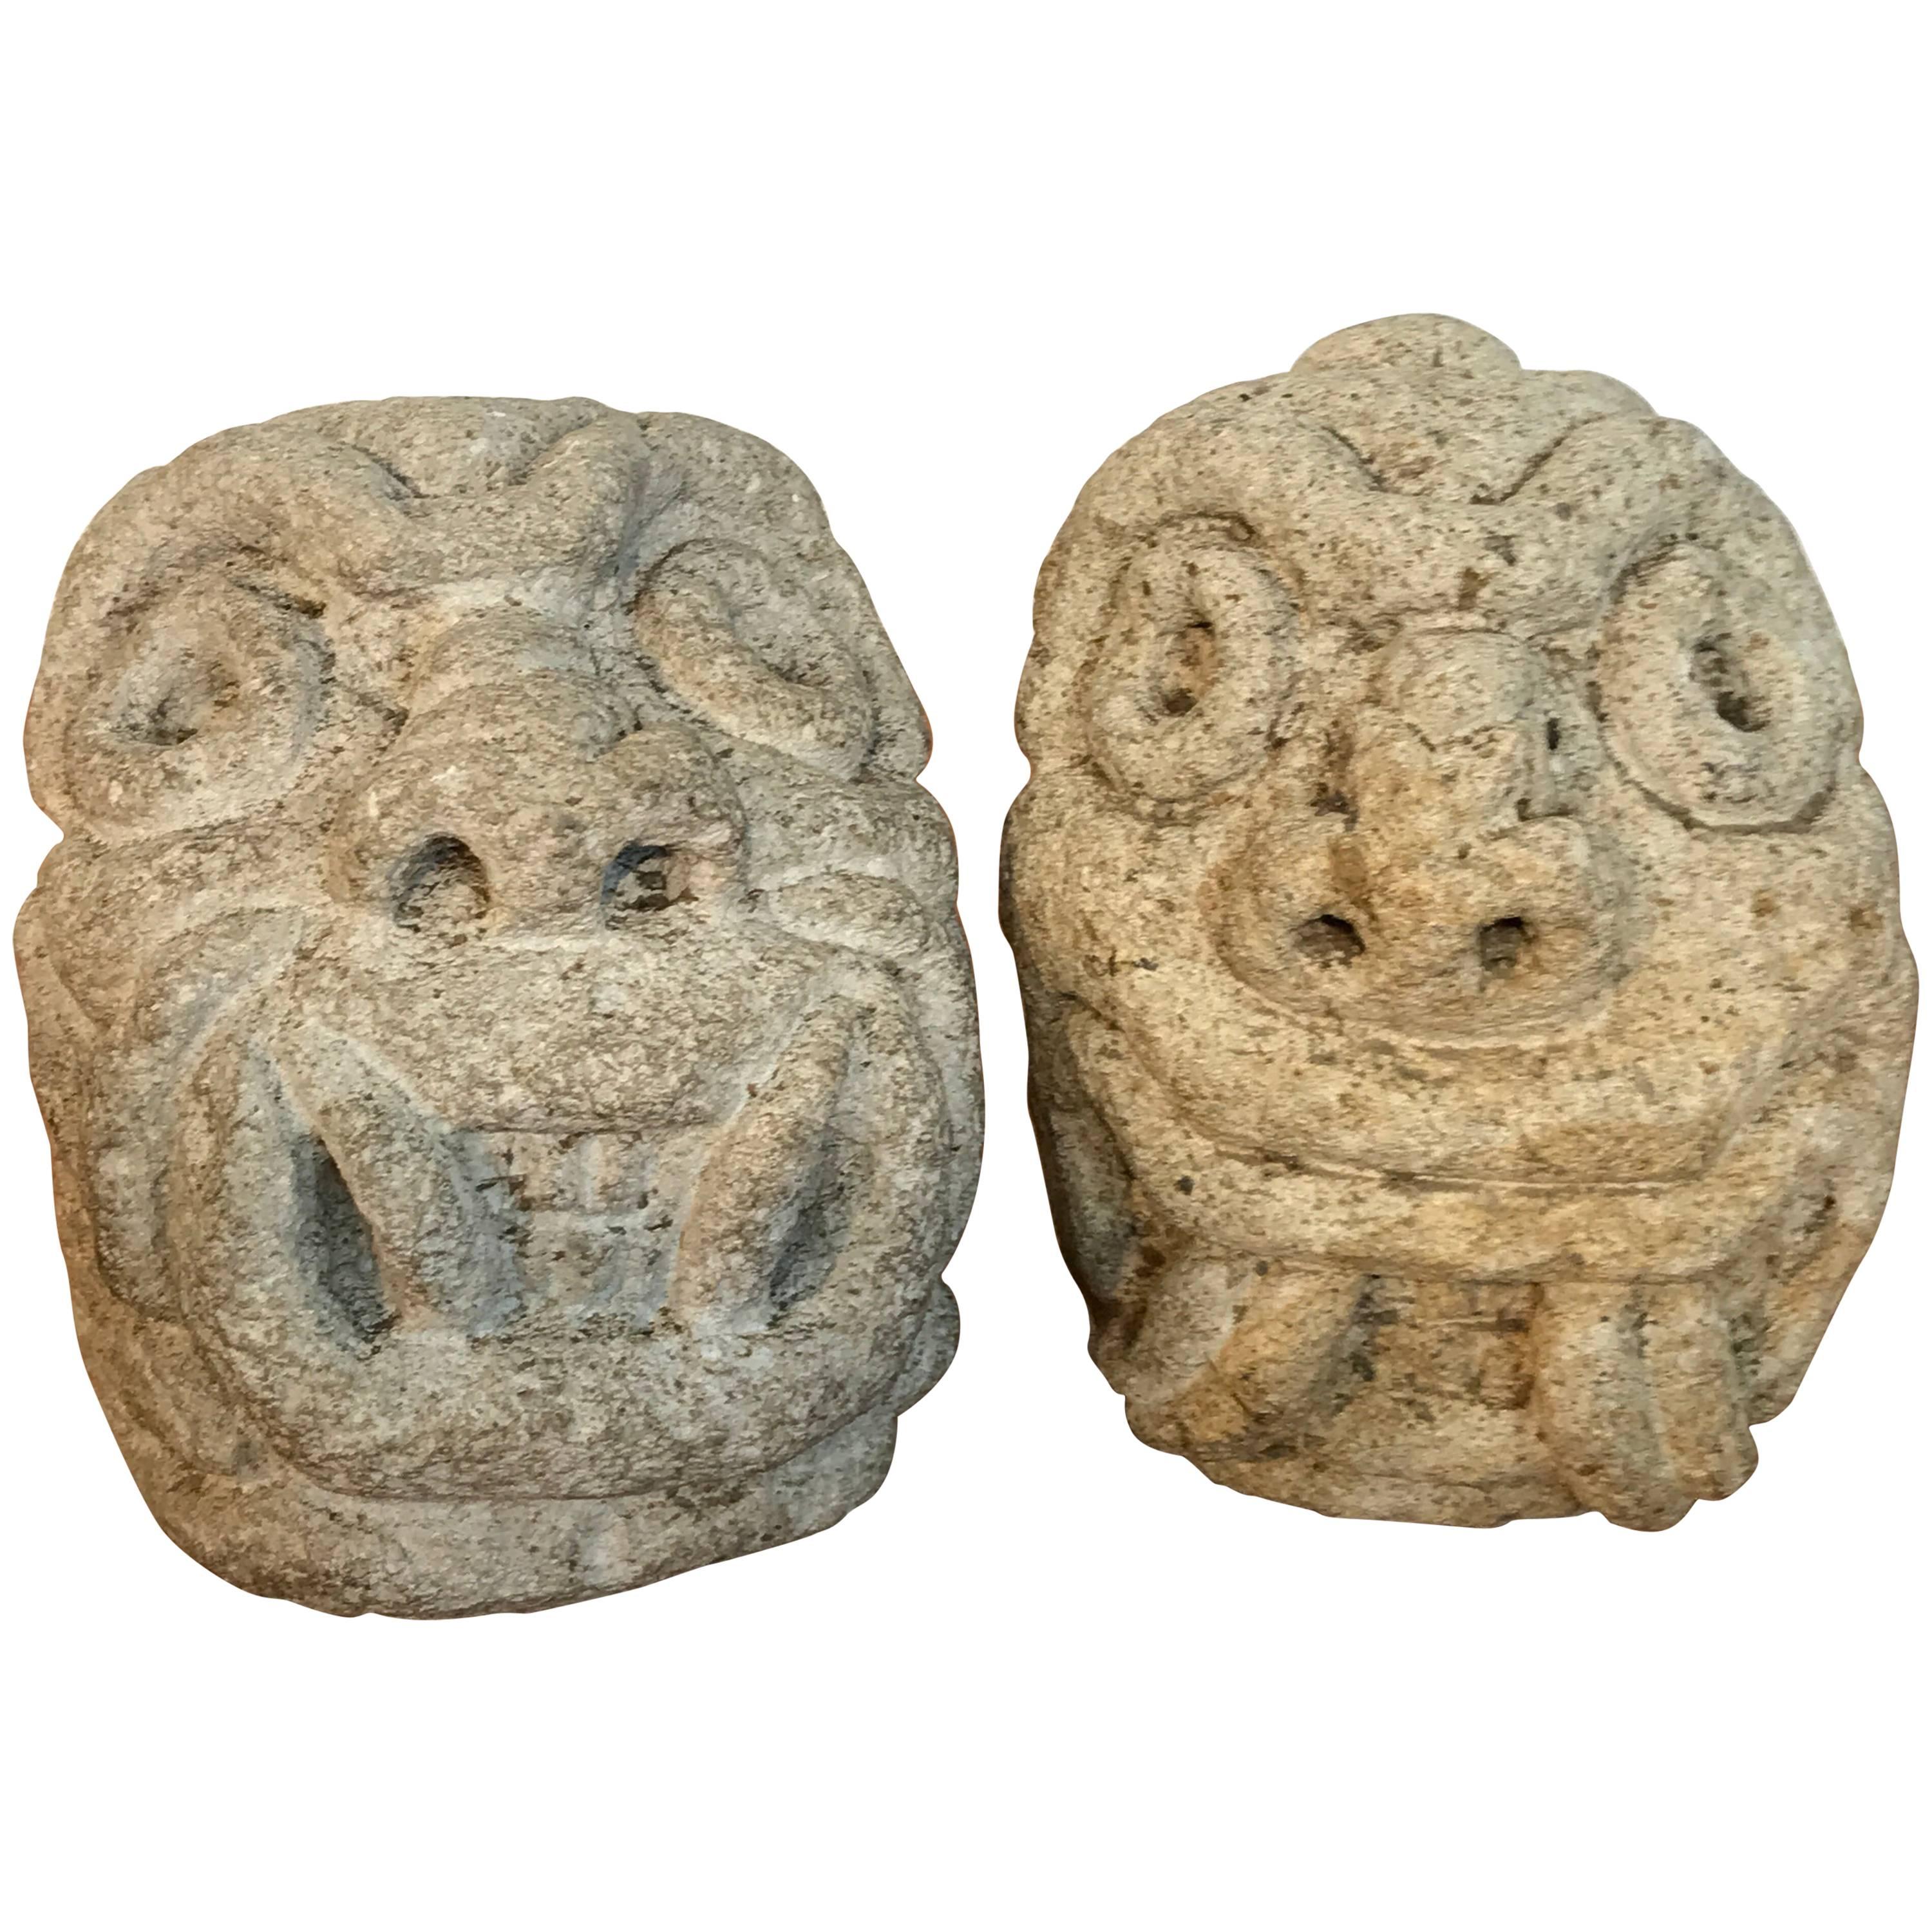 Two Carved Mayan Deity Limestone Architectural Carvings or Elements